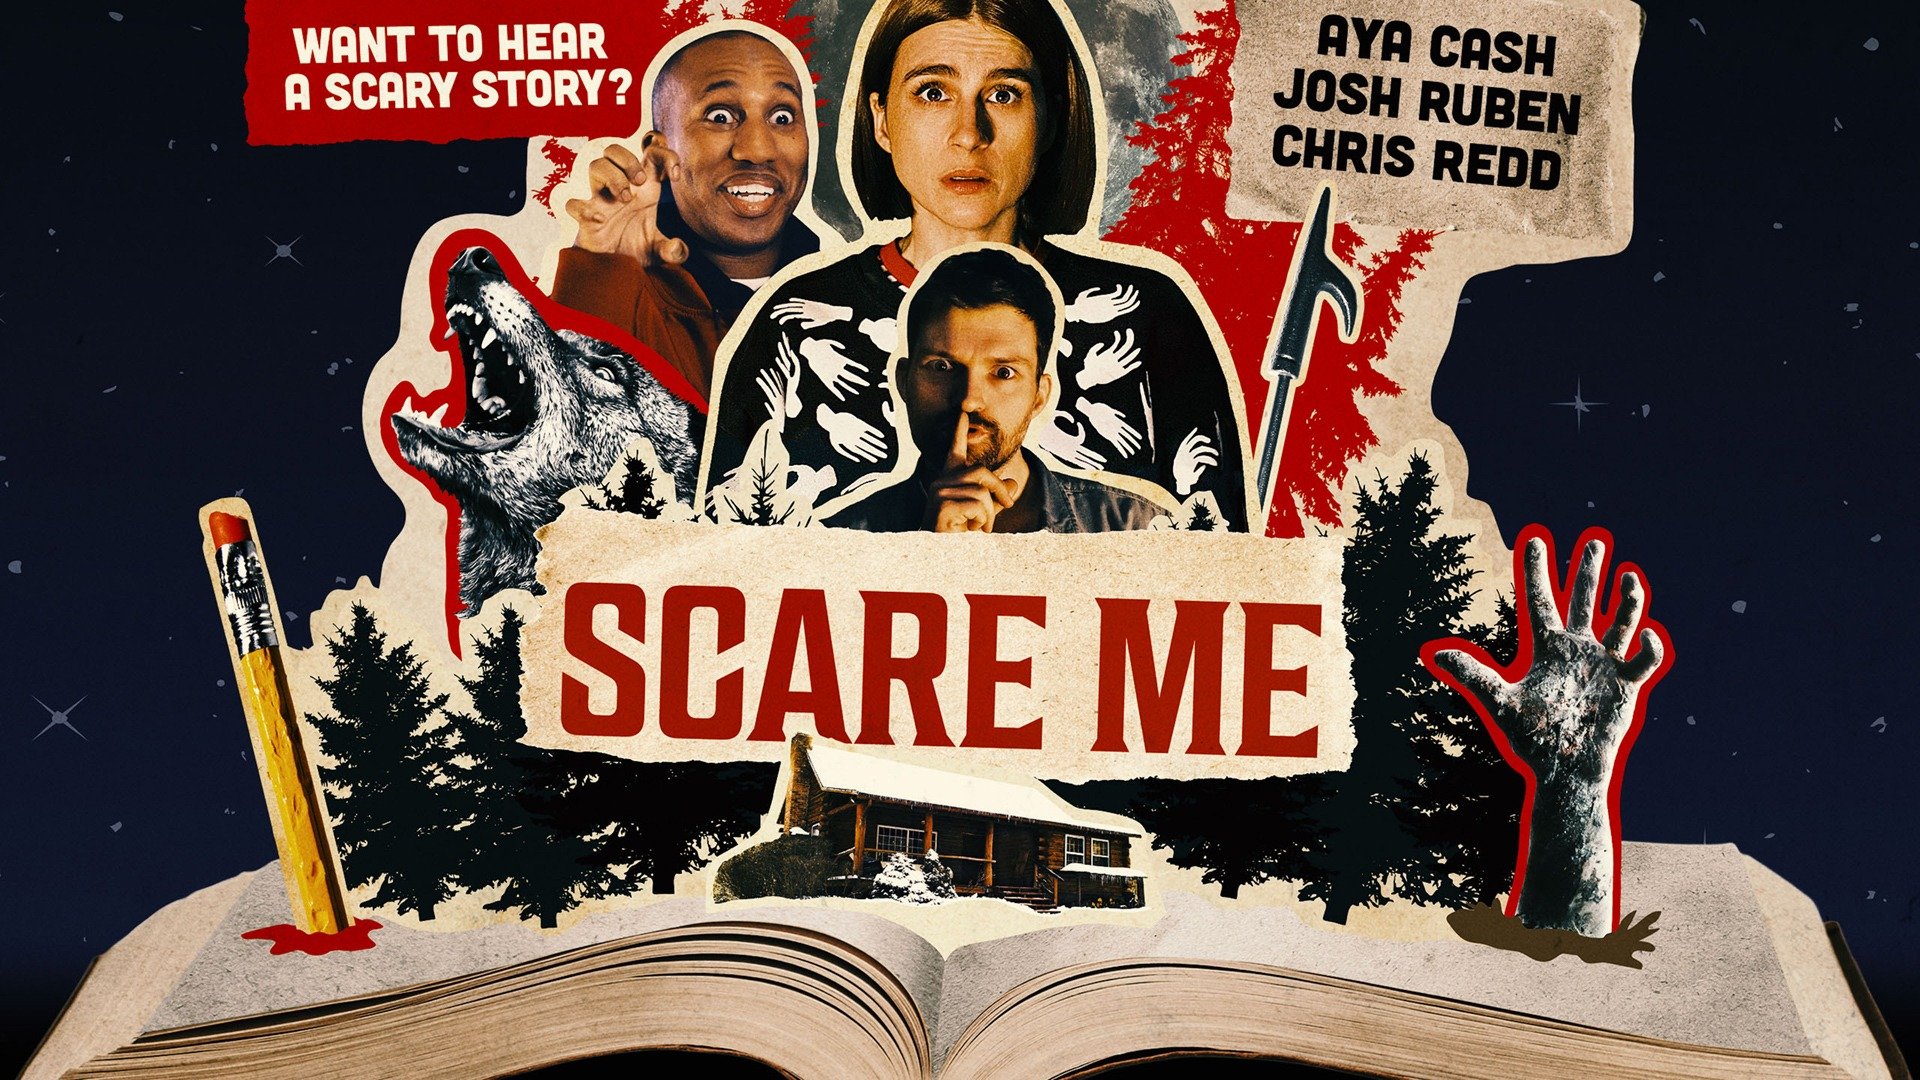 SCARE ME [Review]: Tell Me A Story.